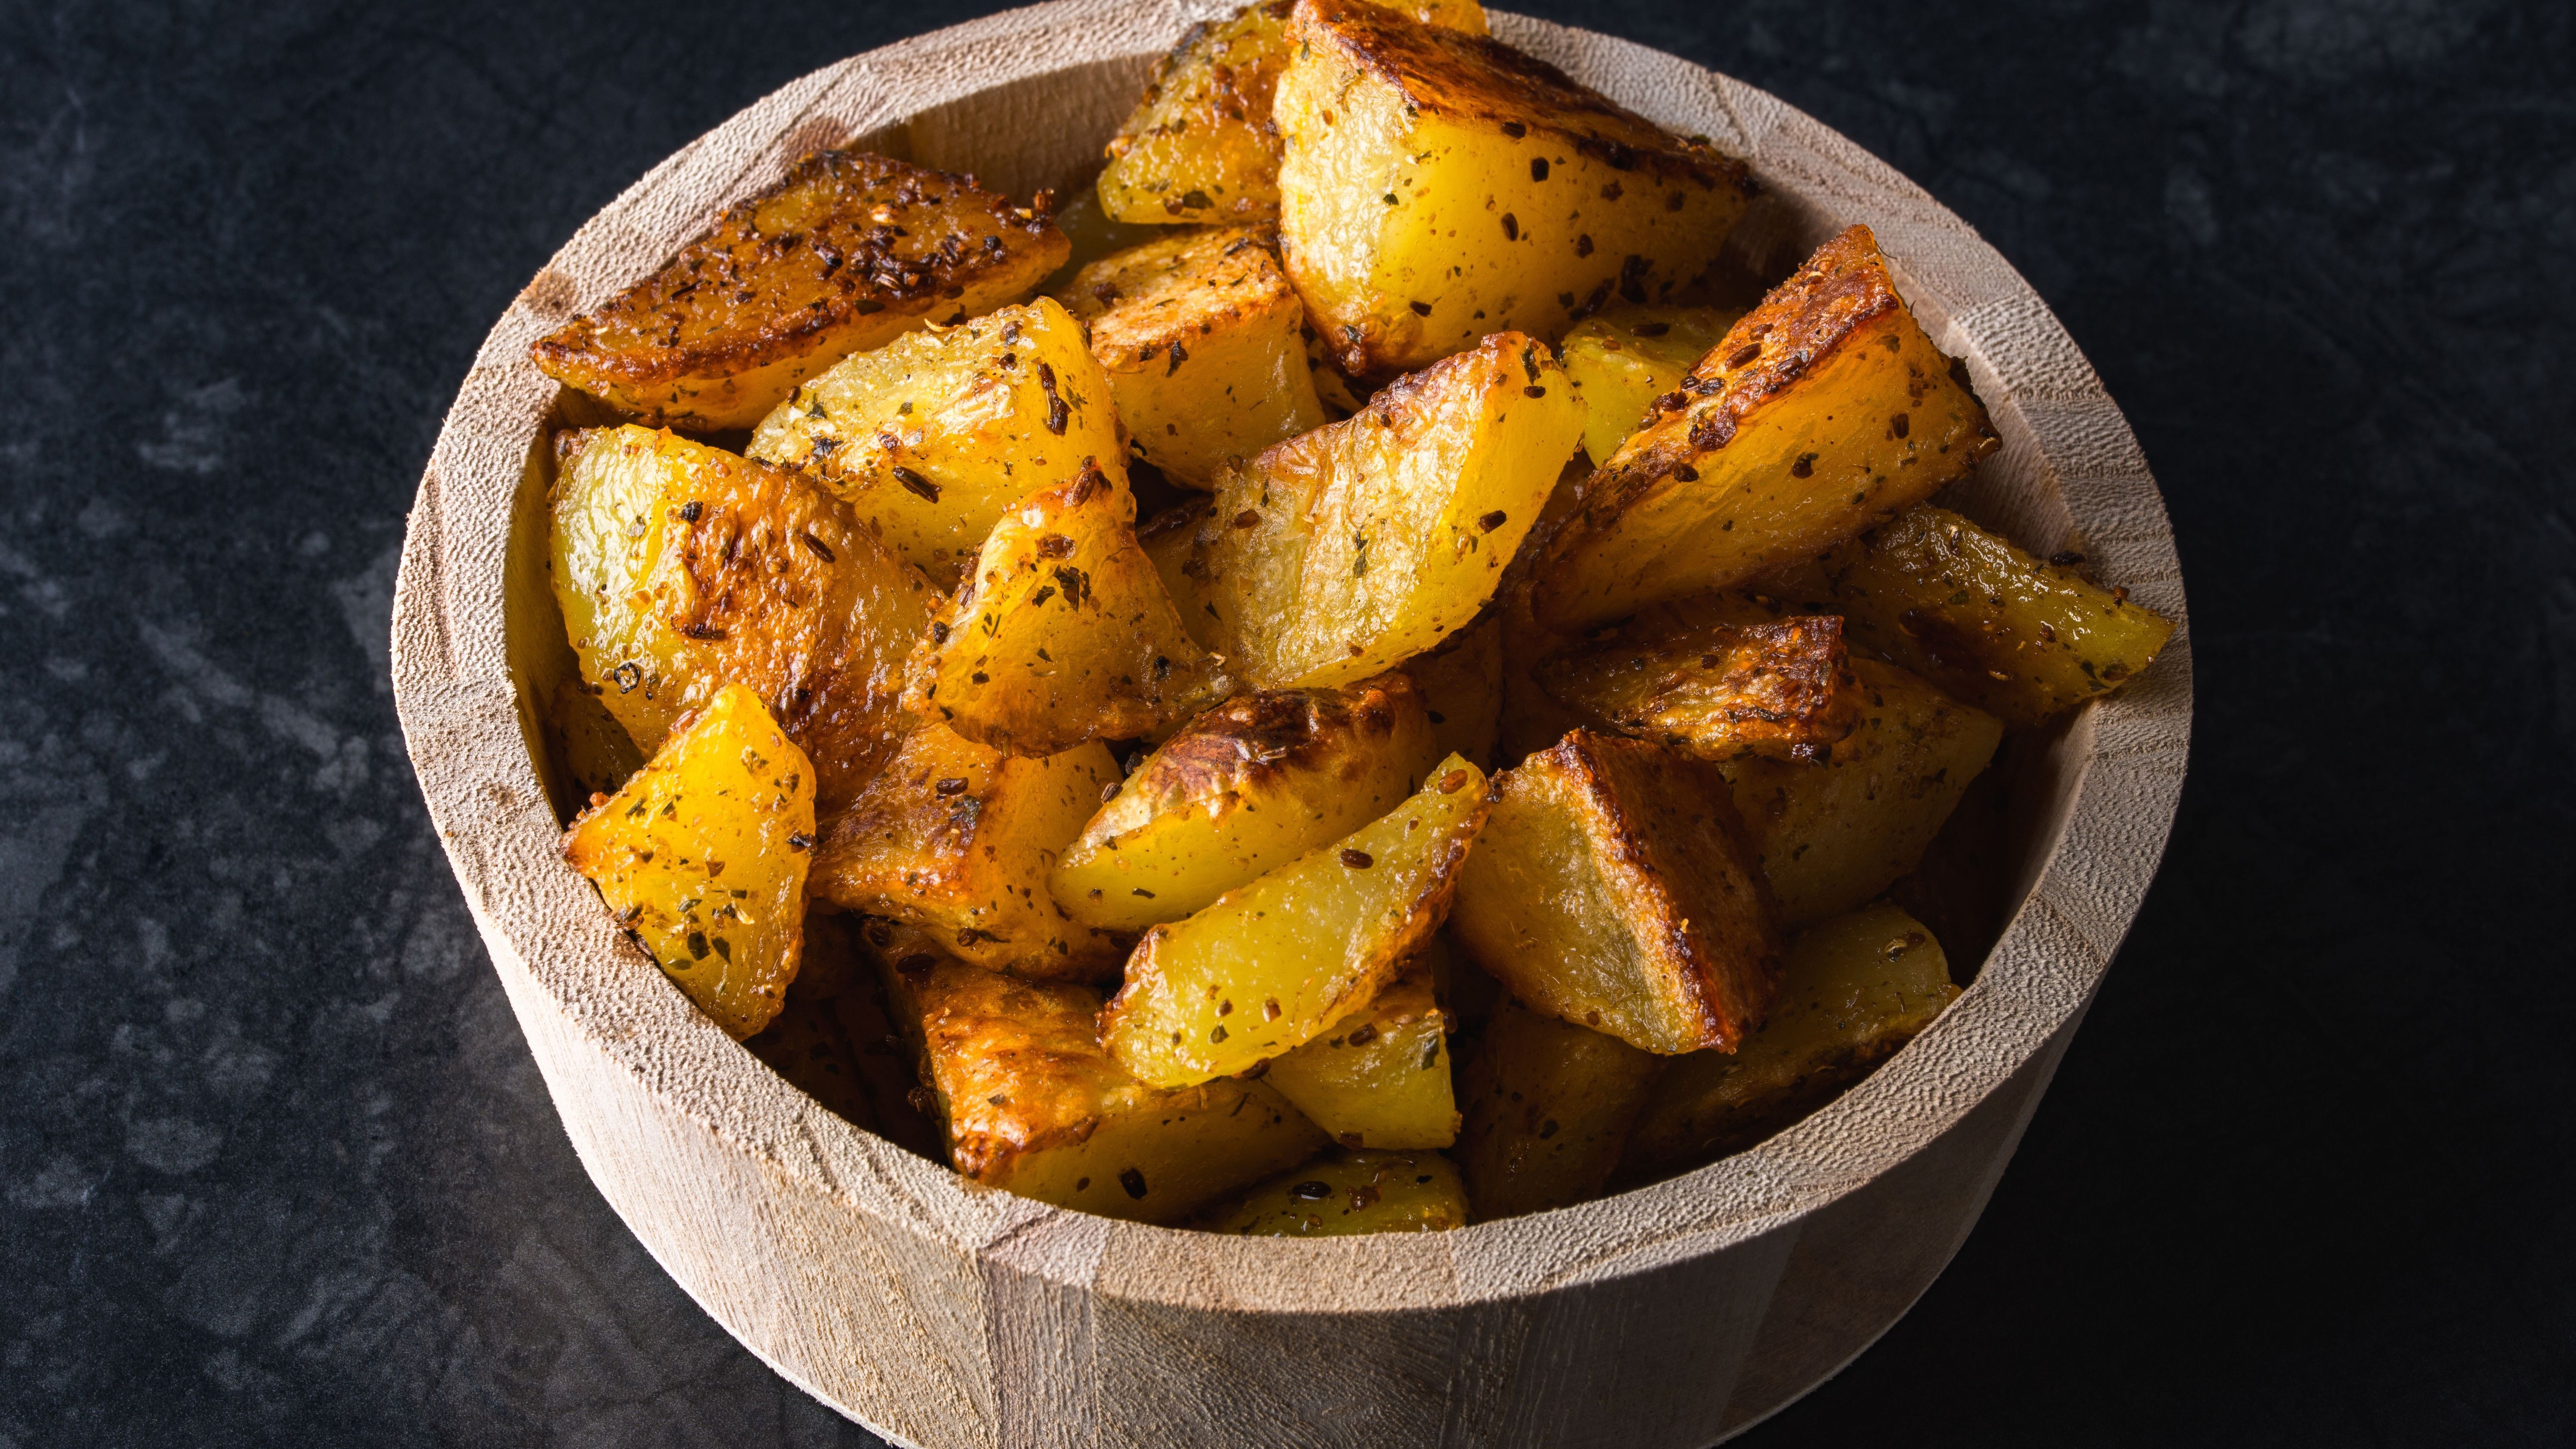 Grilled potatoes in wooden bowl on black background